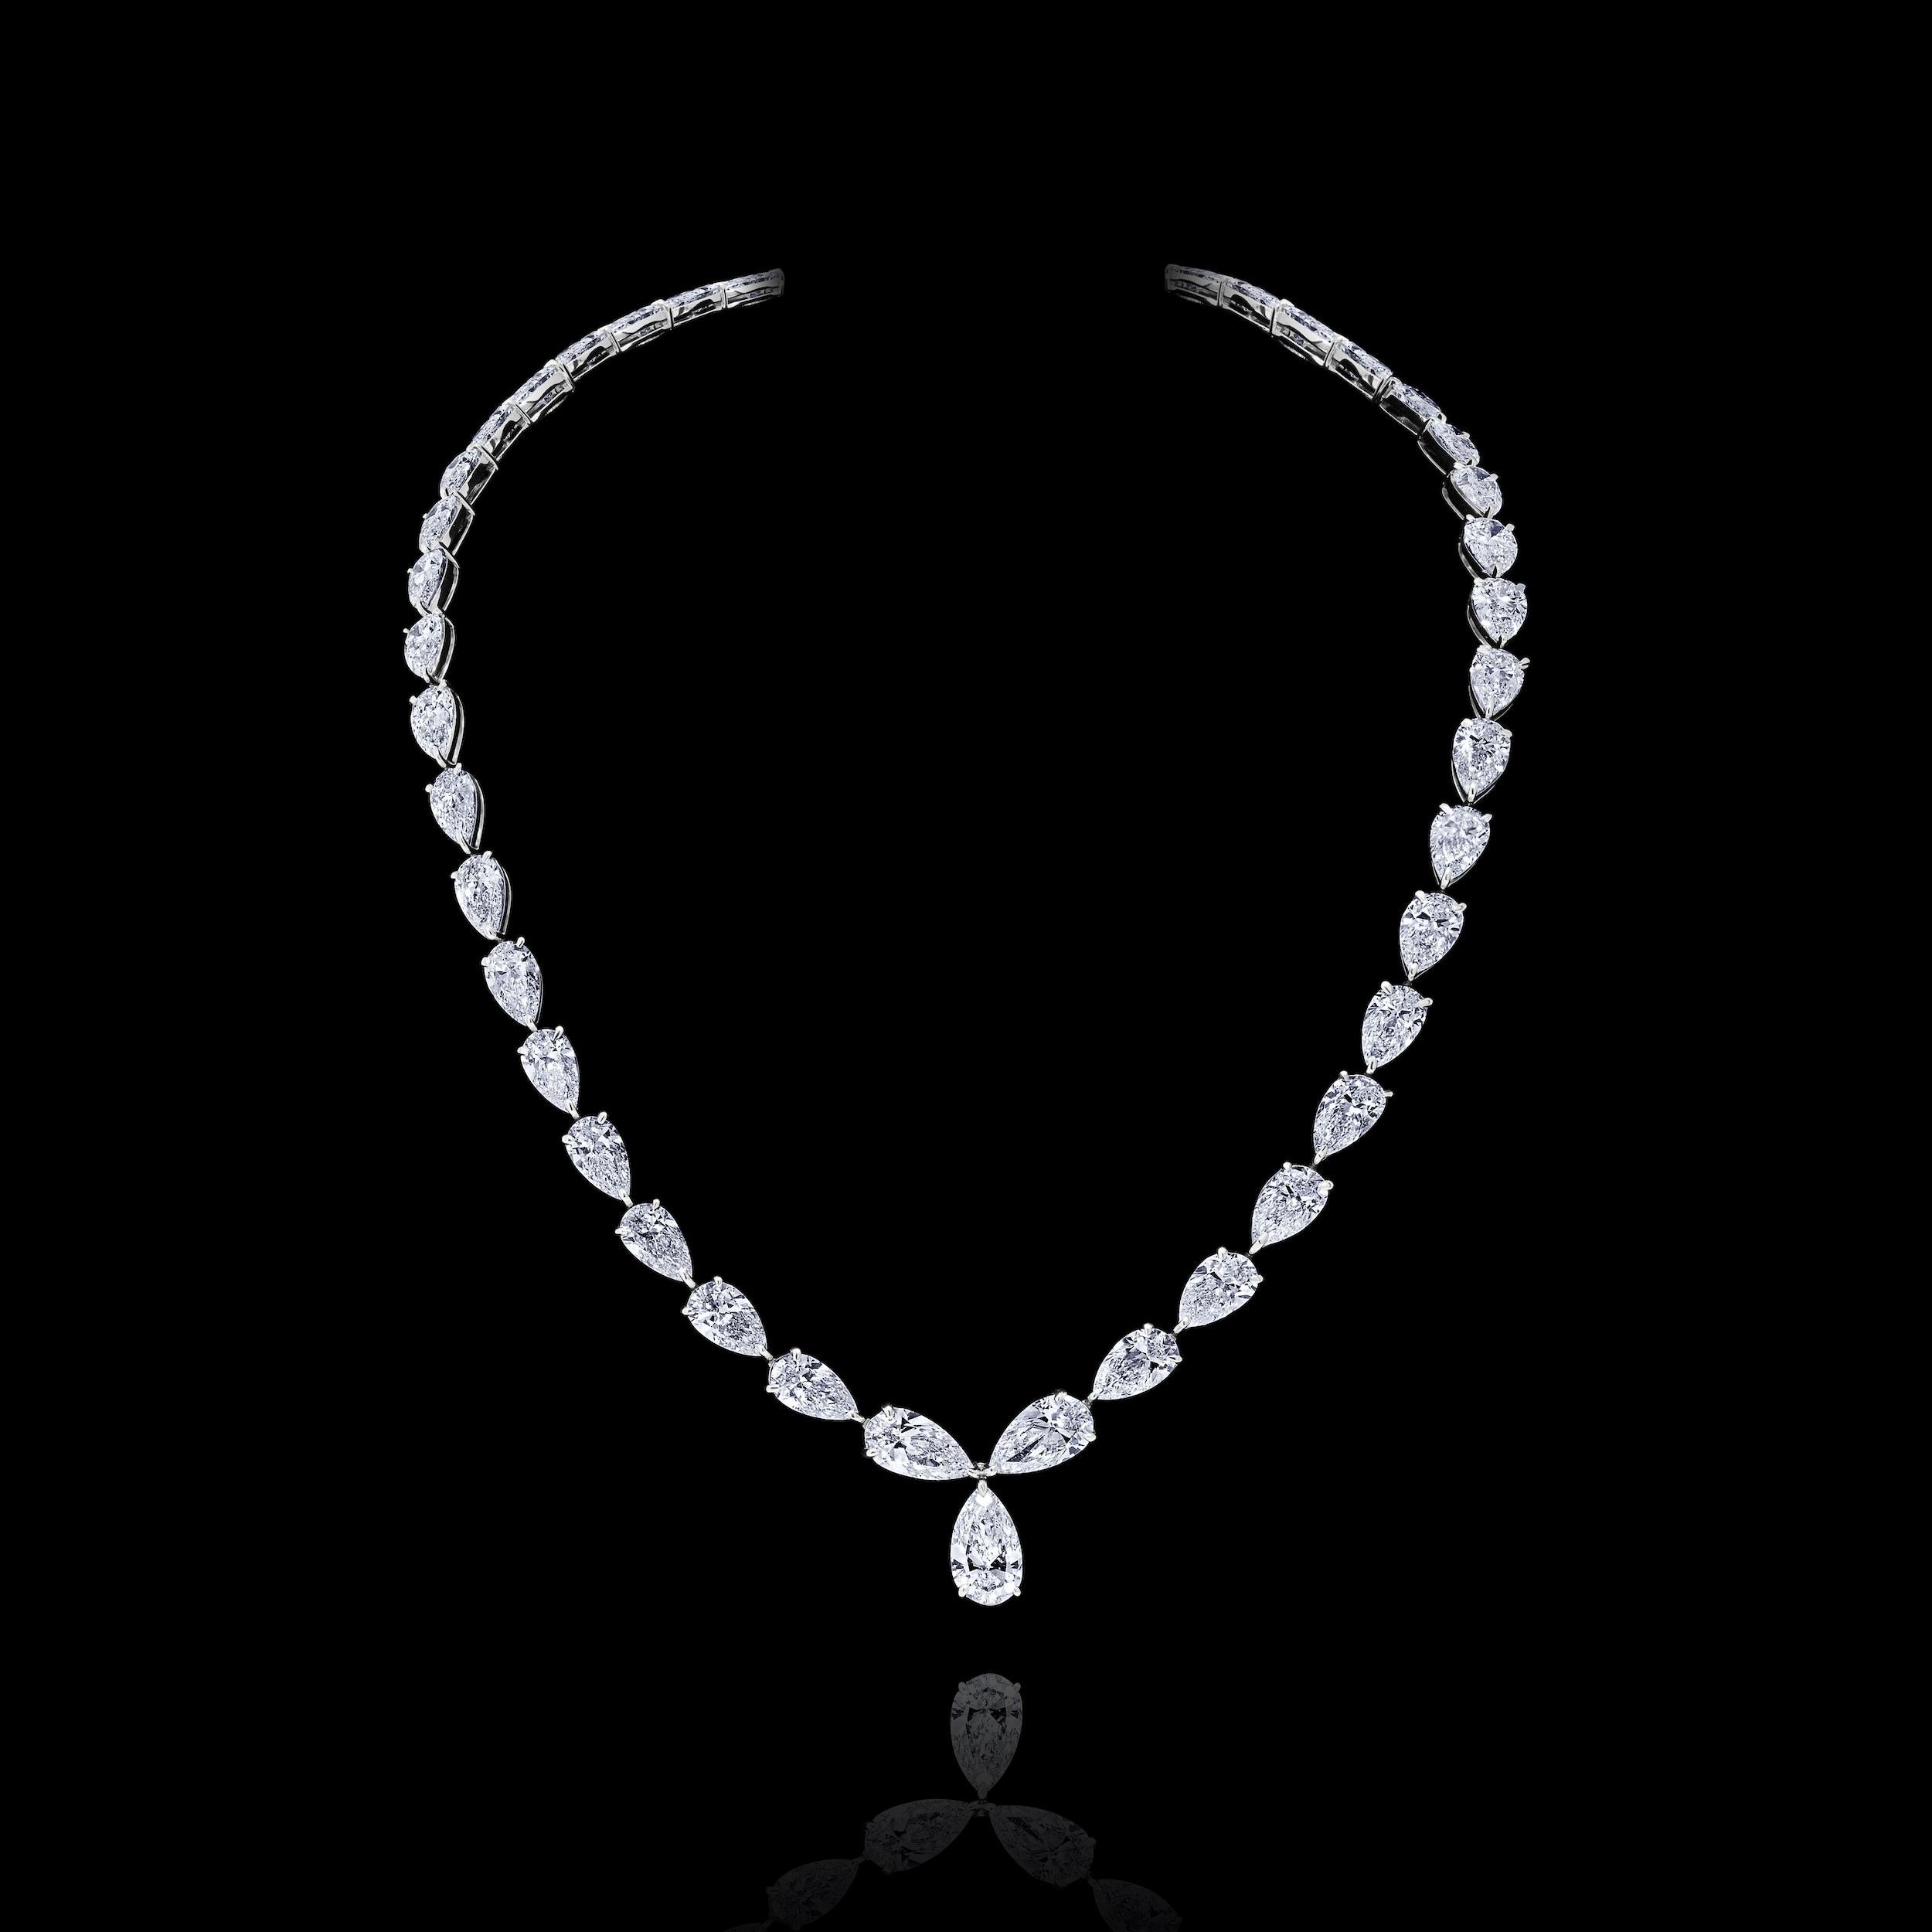 Pear Cut GIA Certified Pear Shape Diamond Riviera Necklace with 42.24 Carats